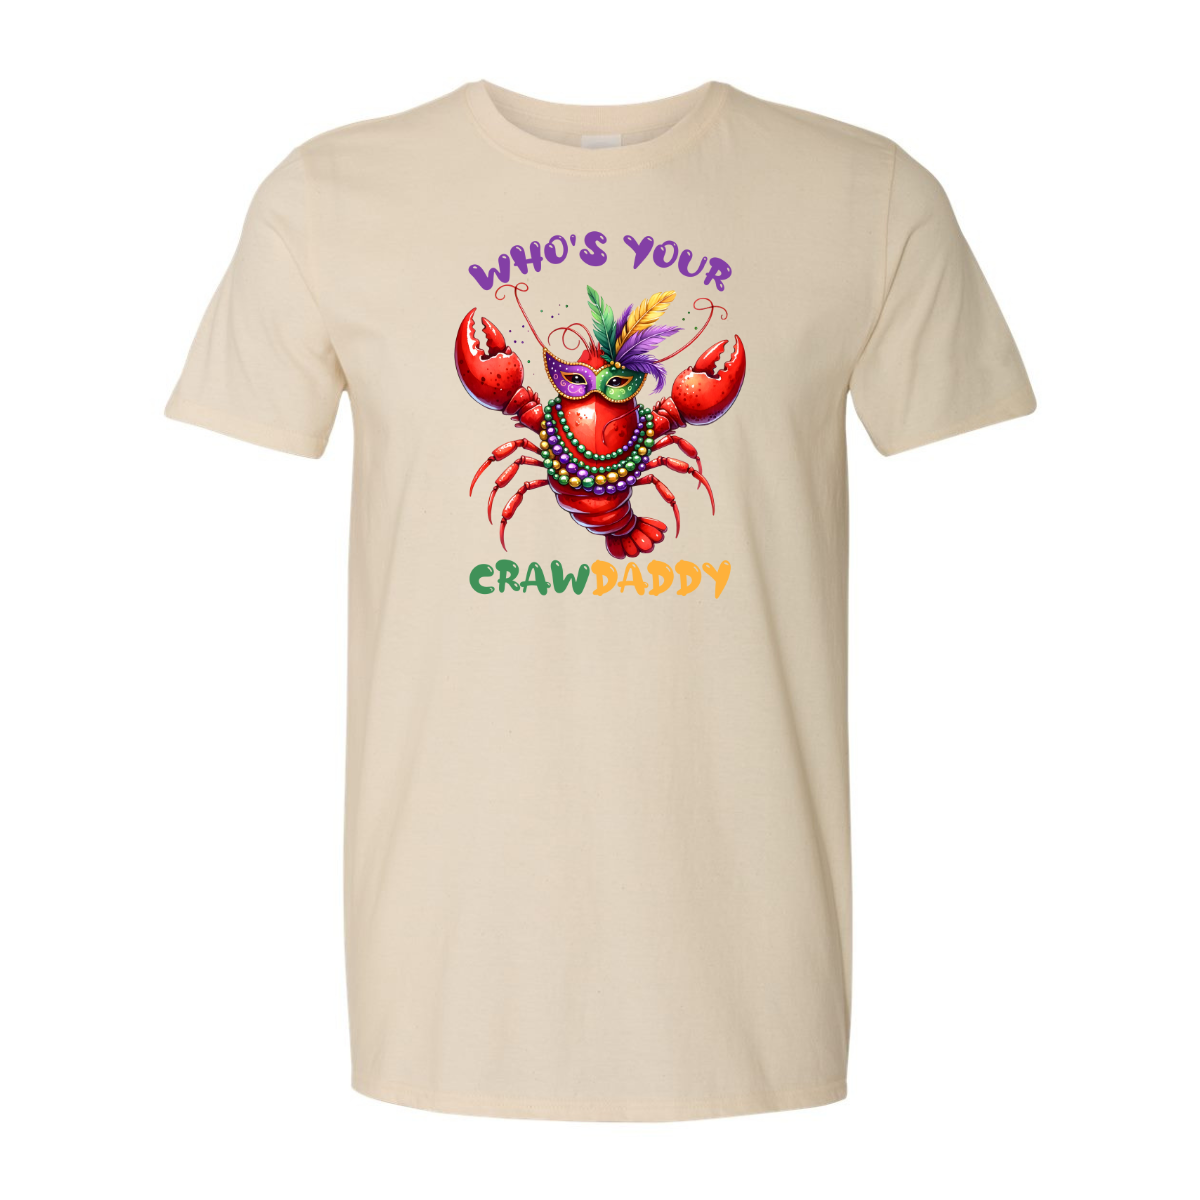 ADULT Unisex T-Shirt MGRA018 WHO'S YOUR CRAW DADDY